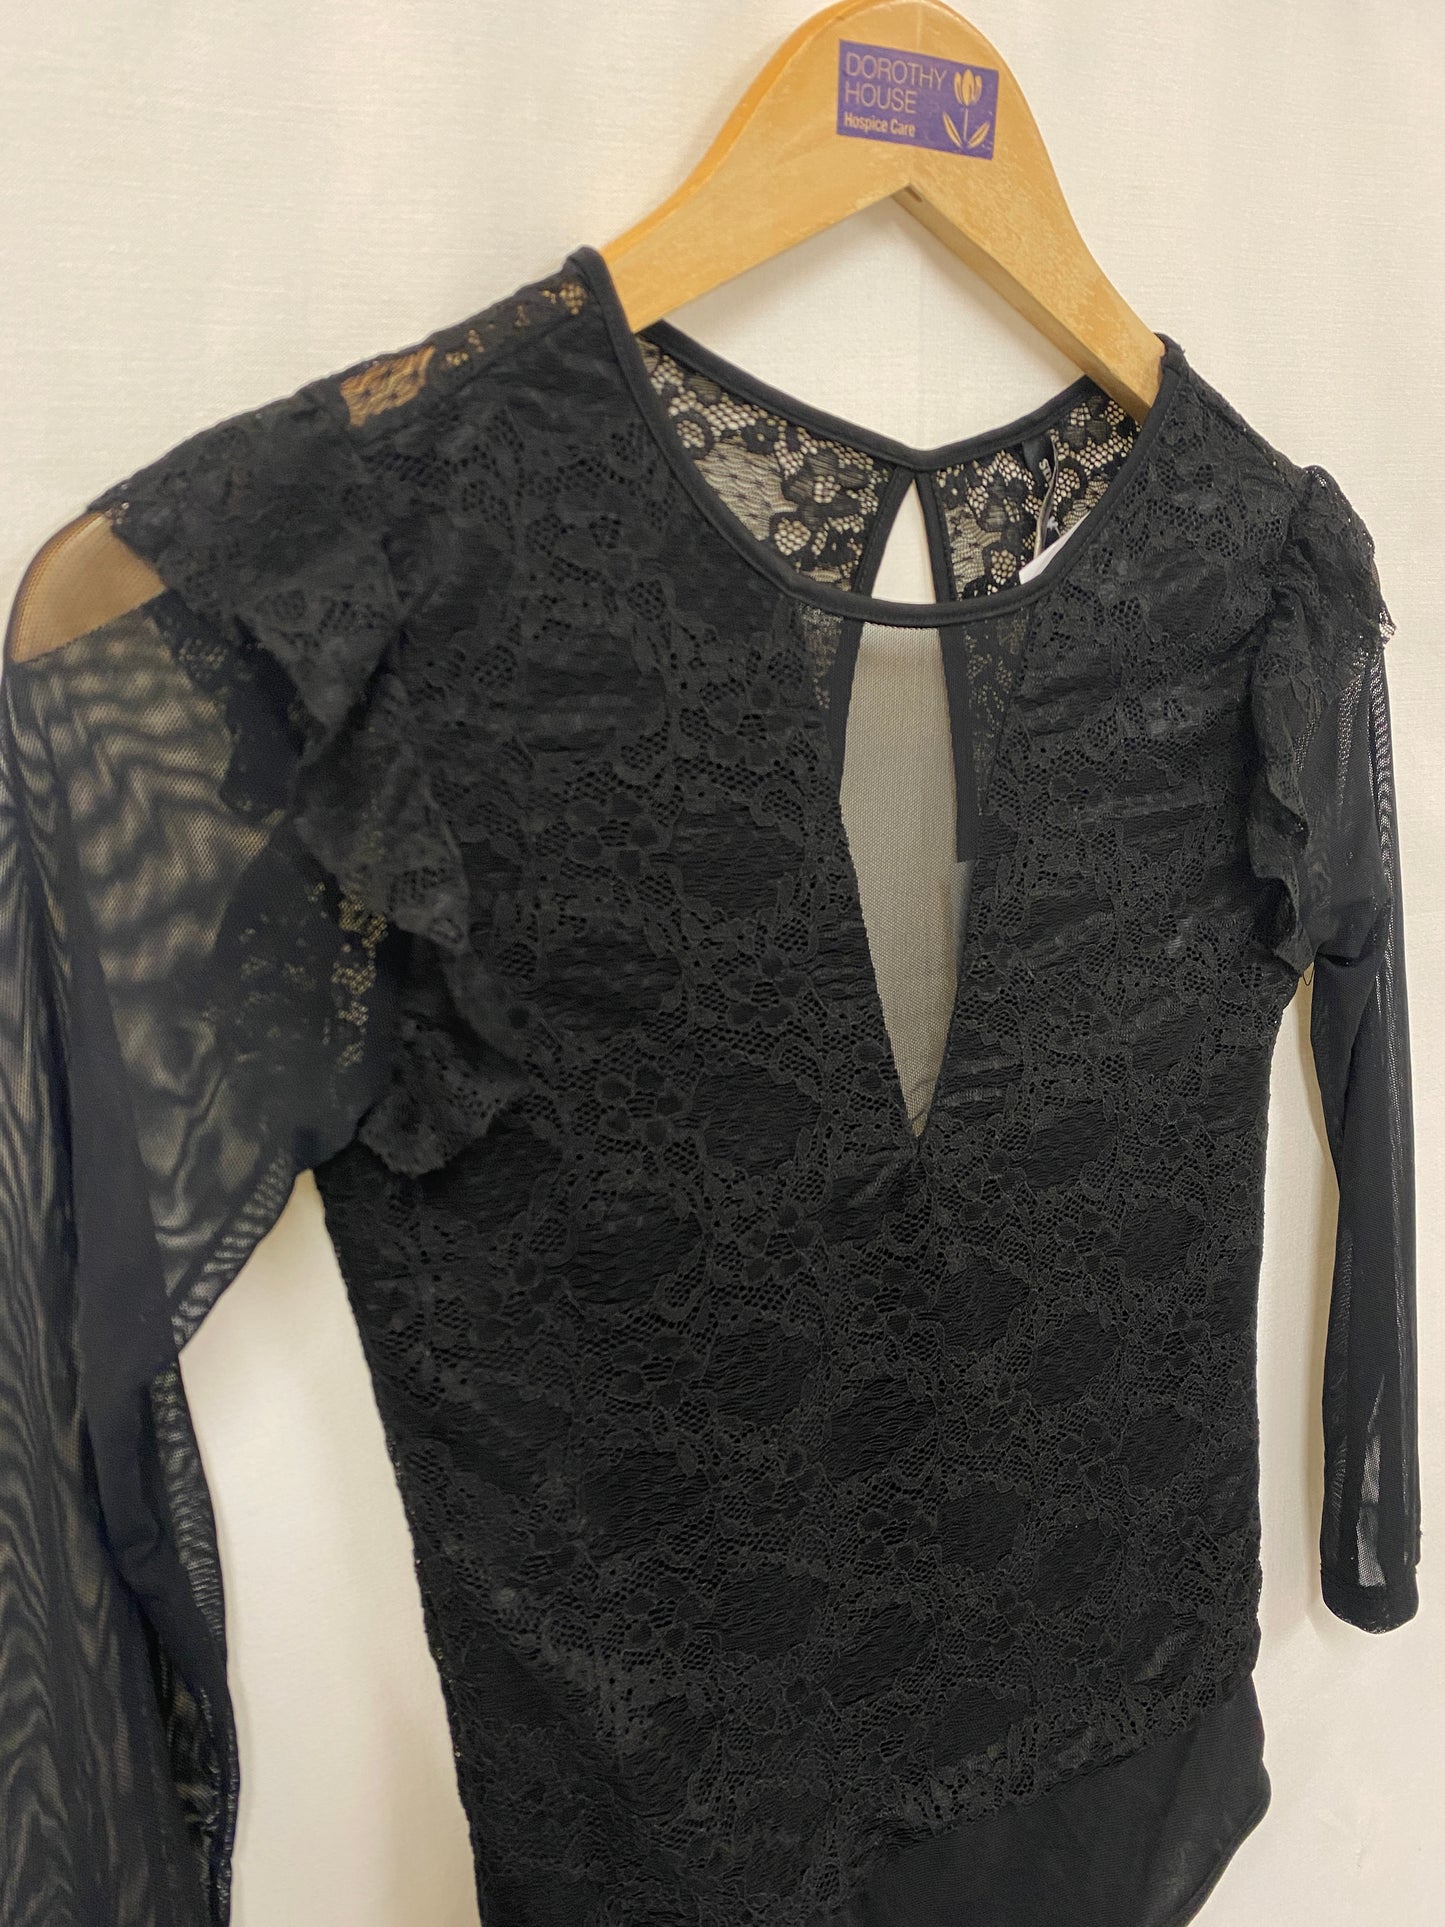 BNWT Black Lace Body Suit With Sheer Panels Size m